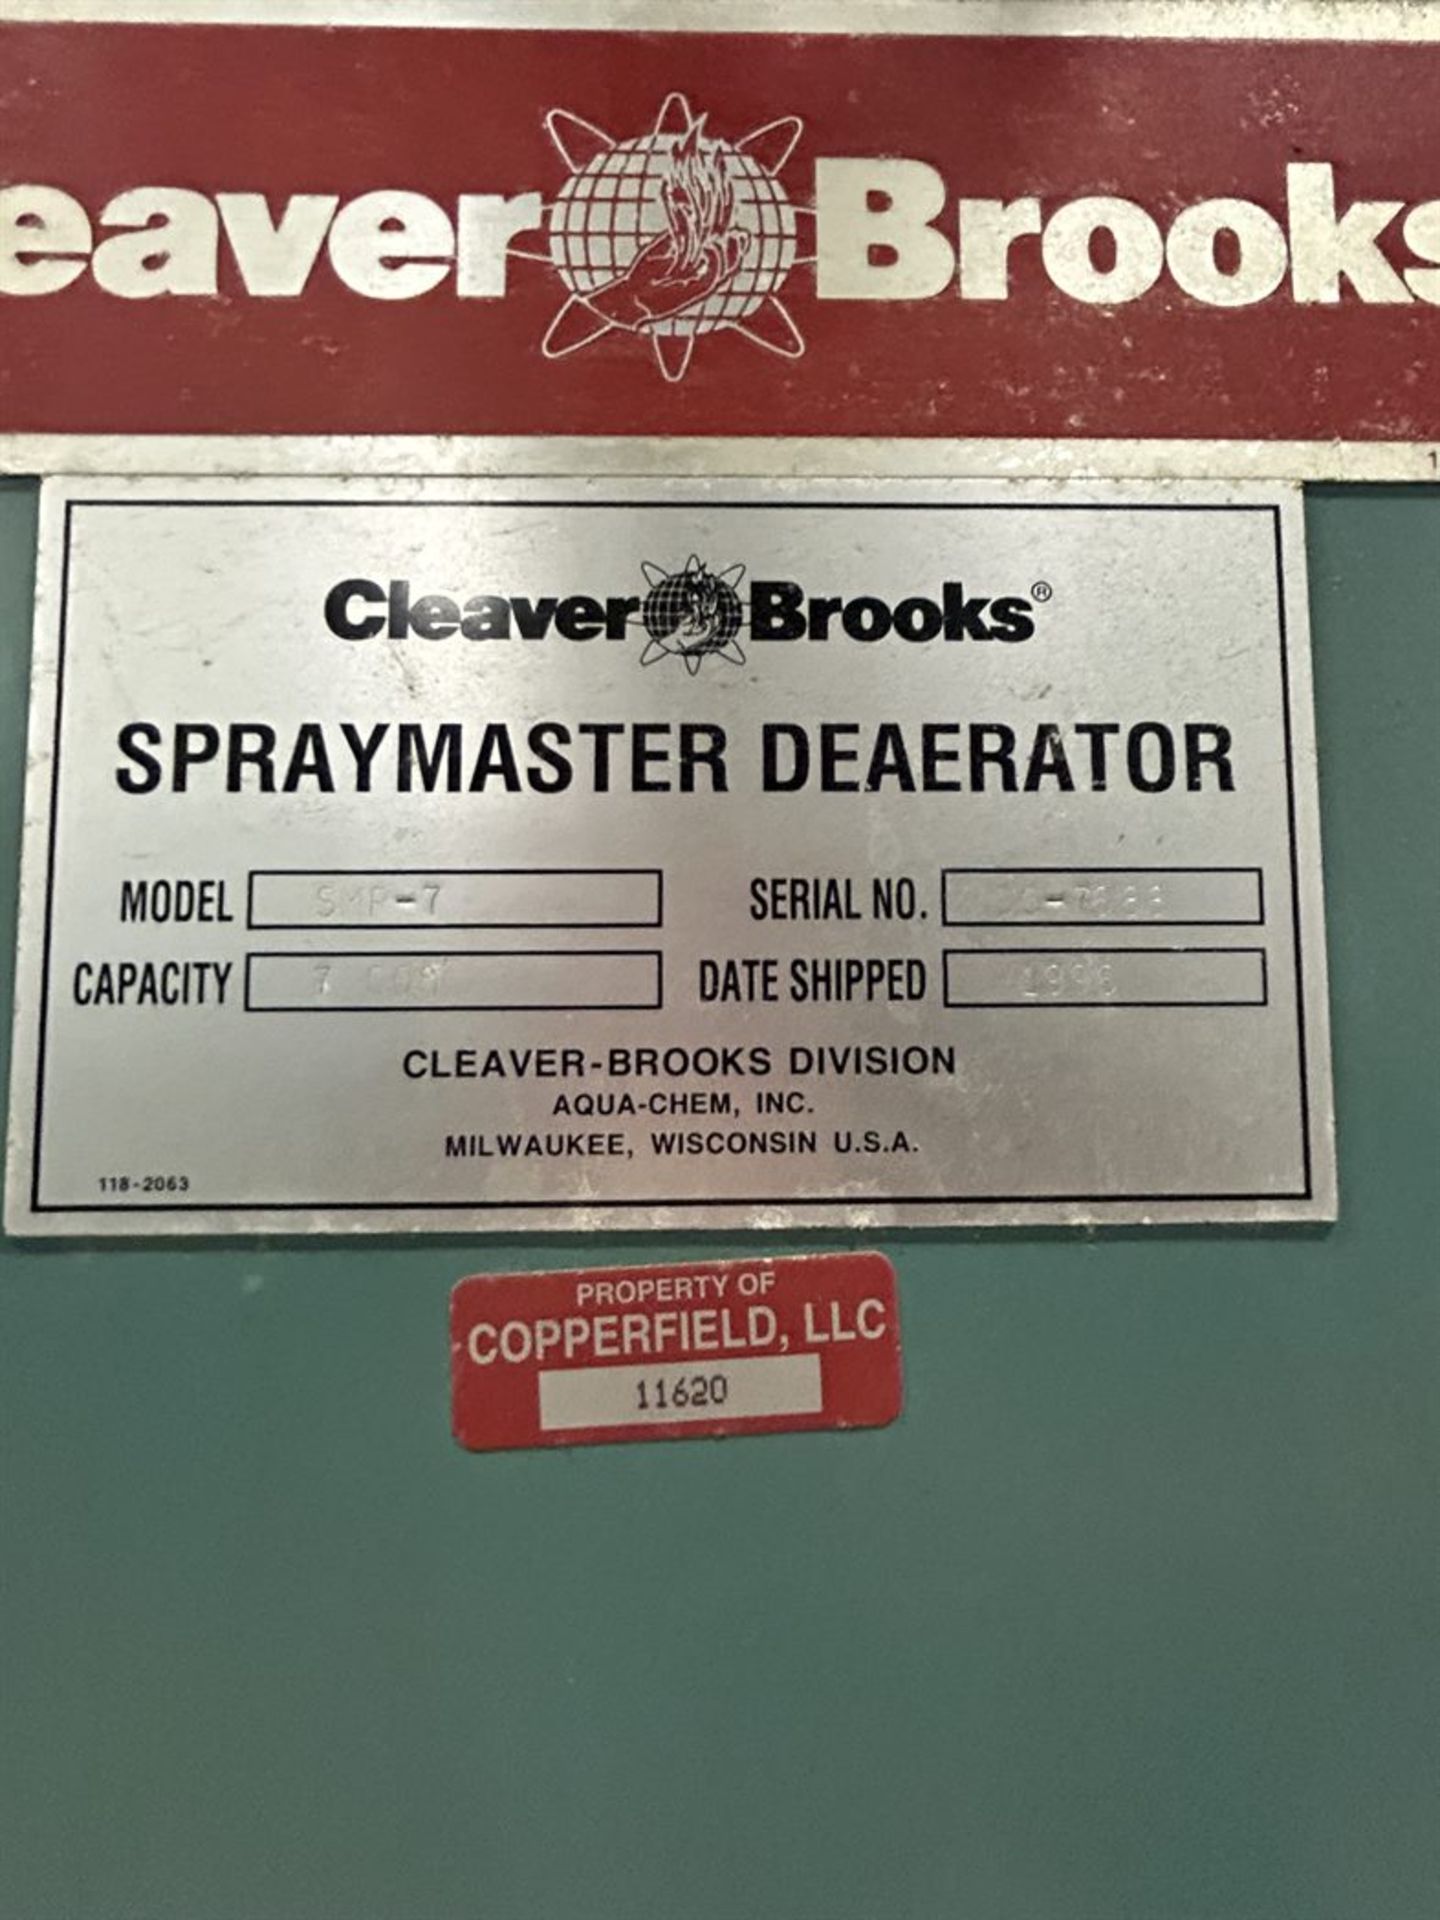 CLEAVER BROOKS SMP-7 Spraymaster Deaerator, s/nDC-7688 (Located in Bremen, IN) - Image 6 of 6